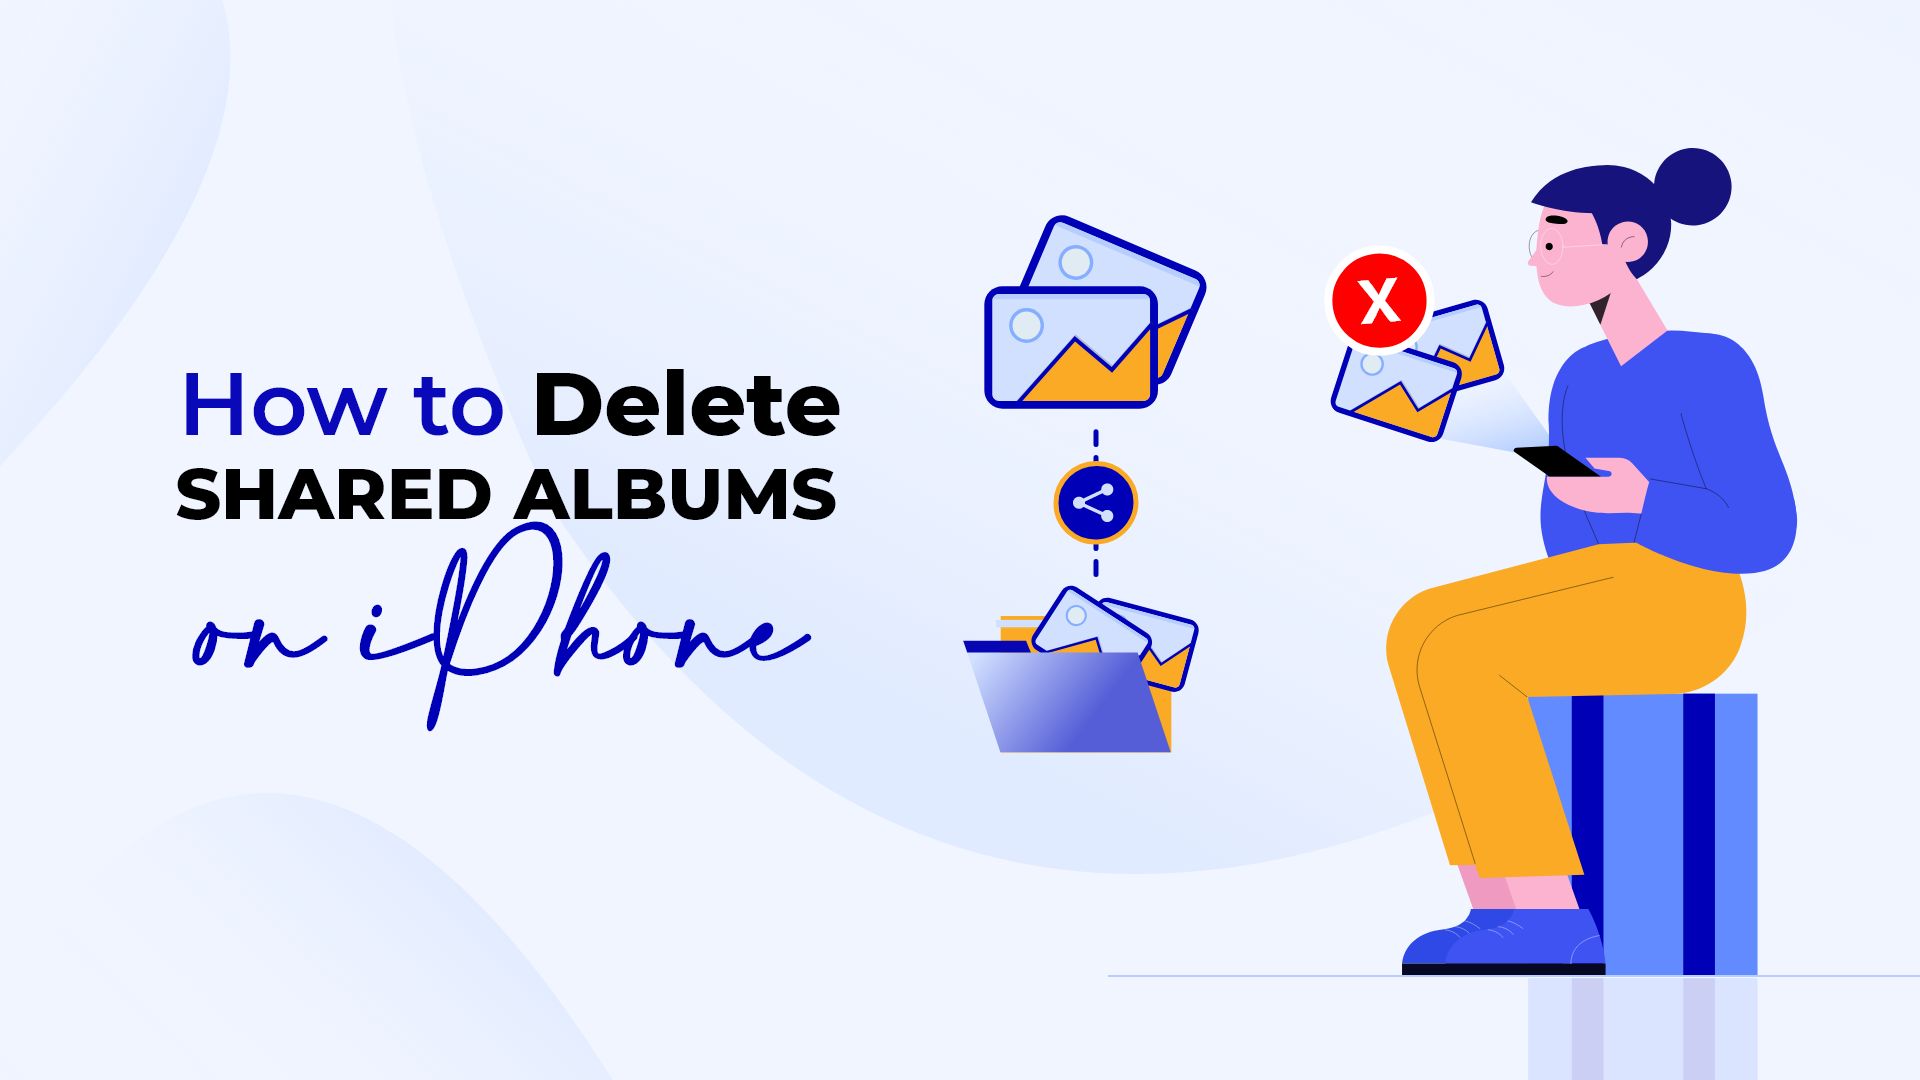 How to Delete Shared Albums on iPhone